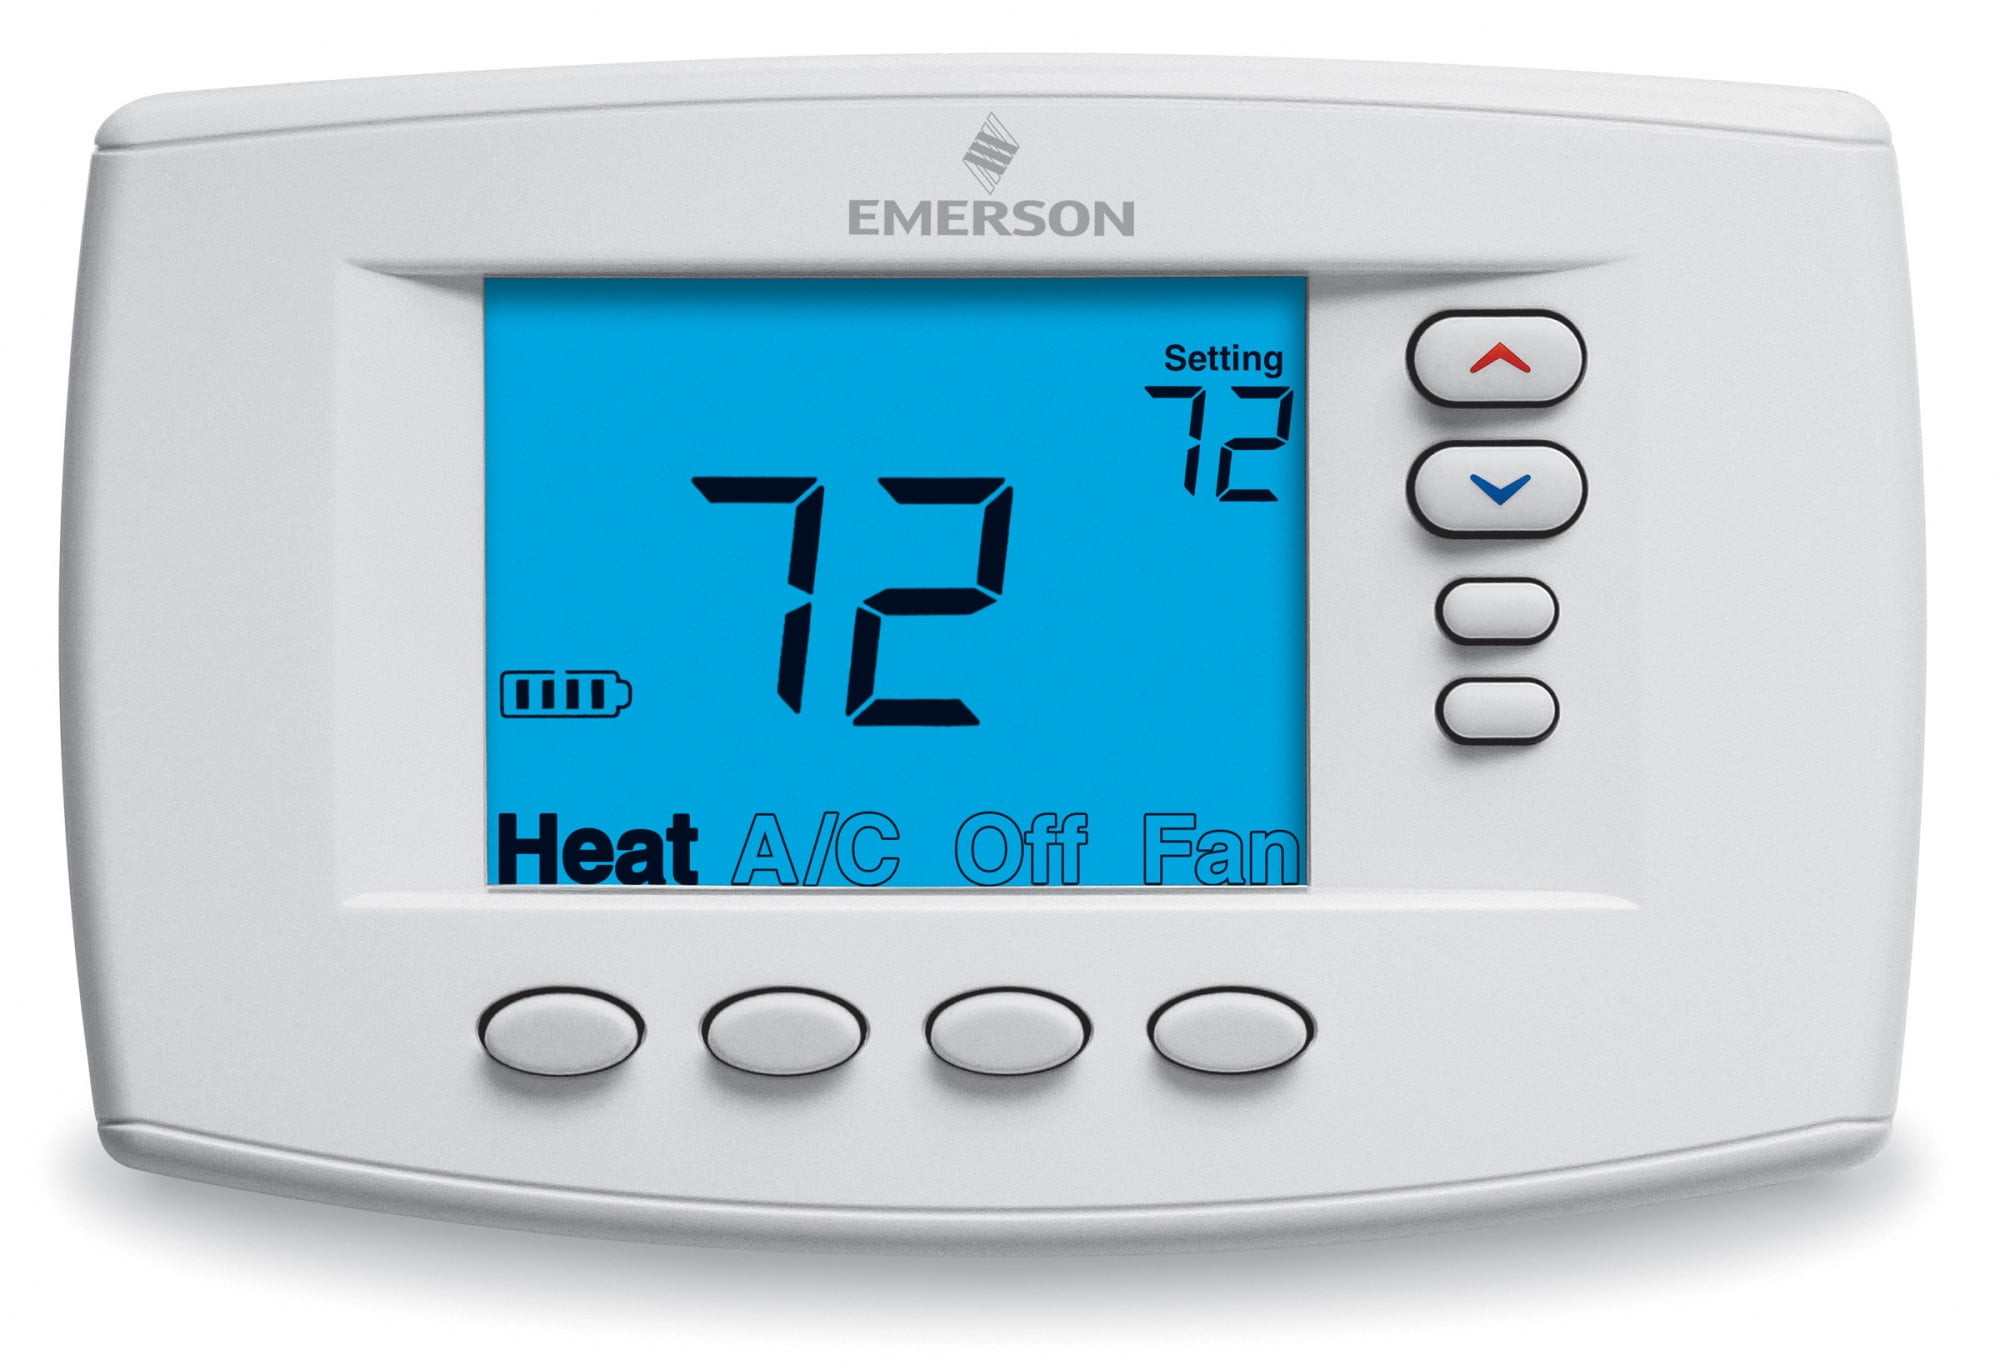 EconoHome Non-Programmable Thermostat for Home - Heat & Cooling Temperature  Control - Easy to Install - Digital Thermostat for Central Gas, Oil